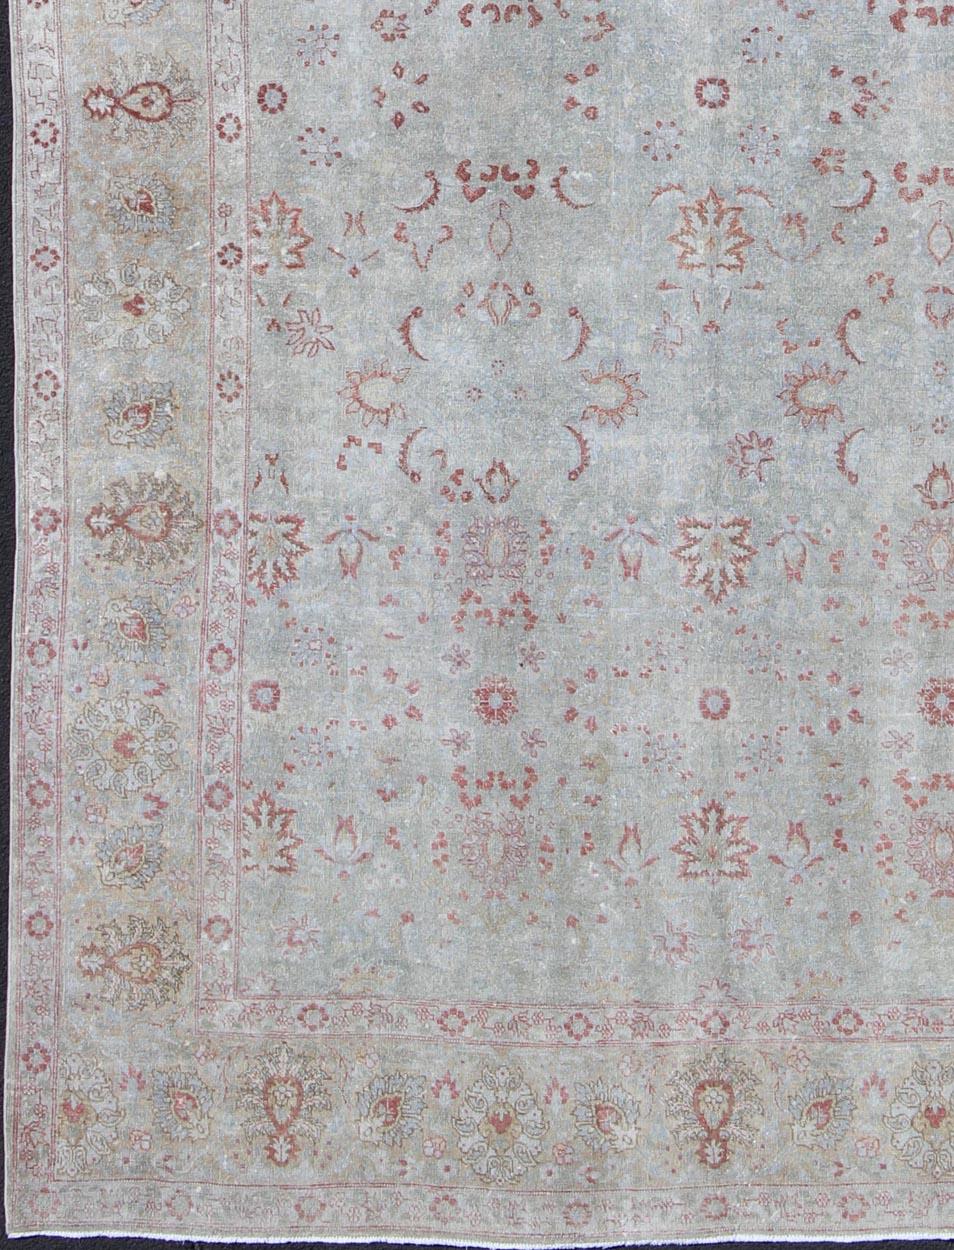 Light blue antique Persian Tabriz rug with floral design and hints of red, rug dan-g77, country of origin / type: Iran / Tabriz, circa 1920

This antique Persian Tabriz carpet, circa early 20th century, features both muted and faded colors and an